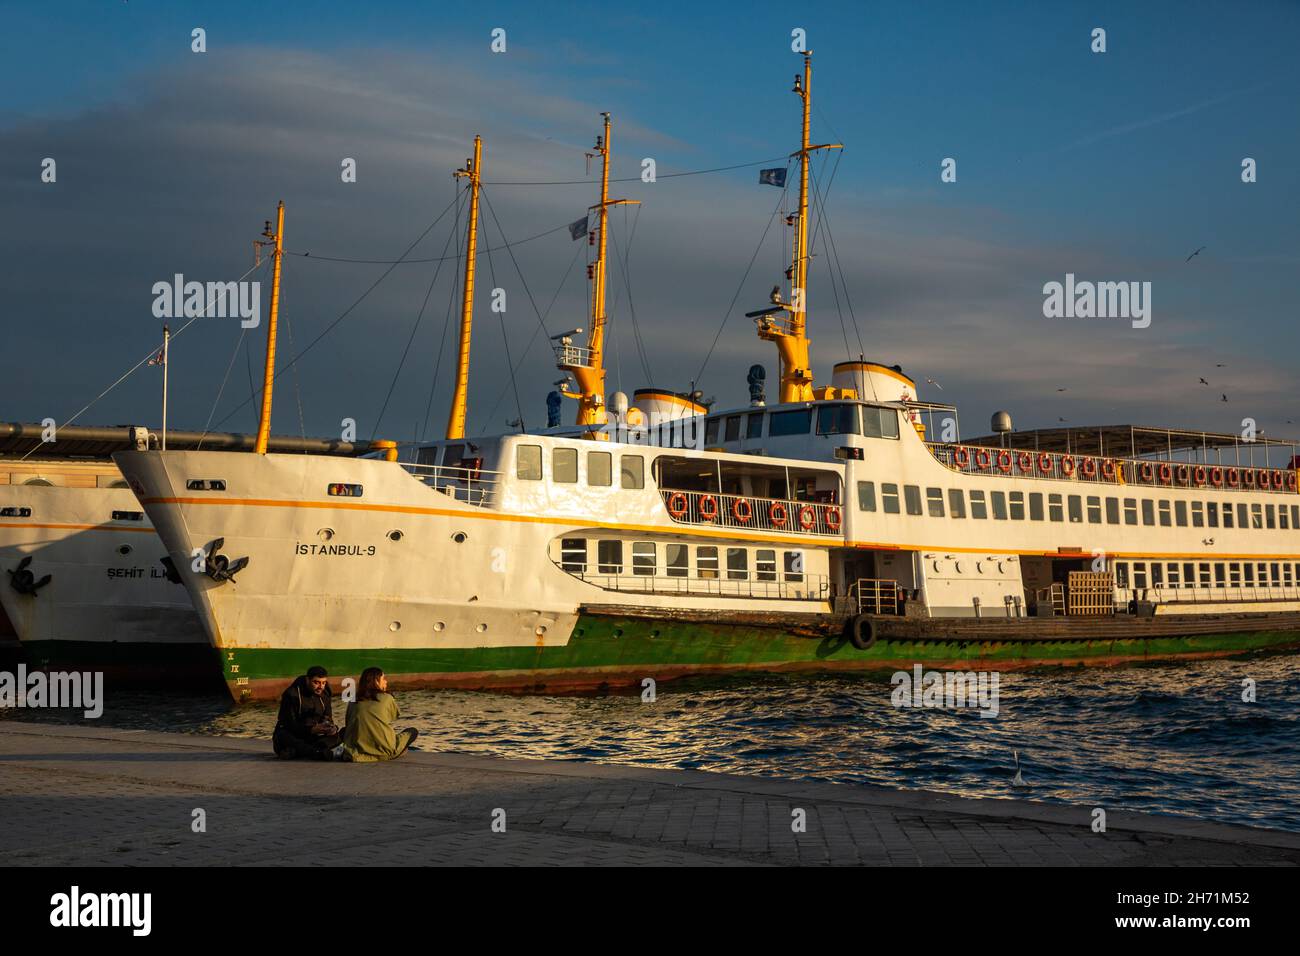 Traditional passenger ships of Istanbul city moored in famous Karakoy pier and wait for the departure time, Istanbul, Nov. 2019 Stock Photo